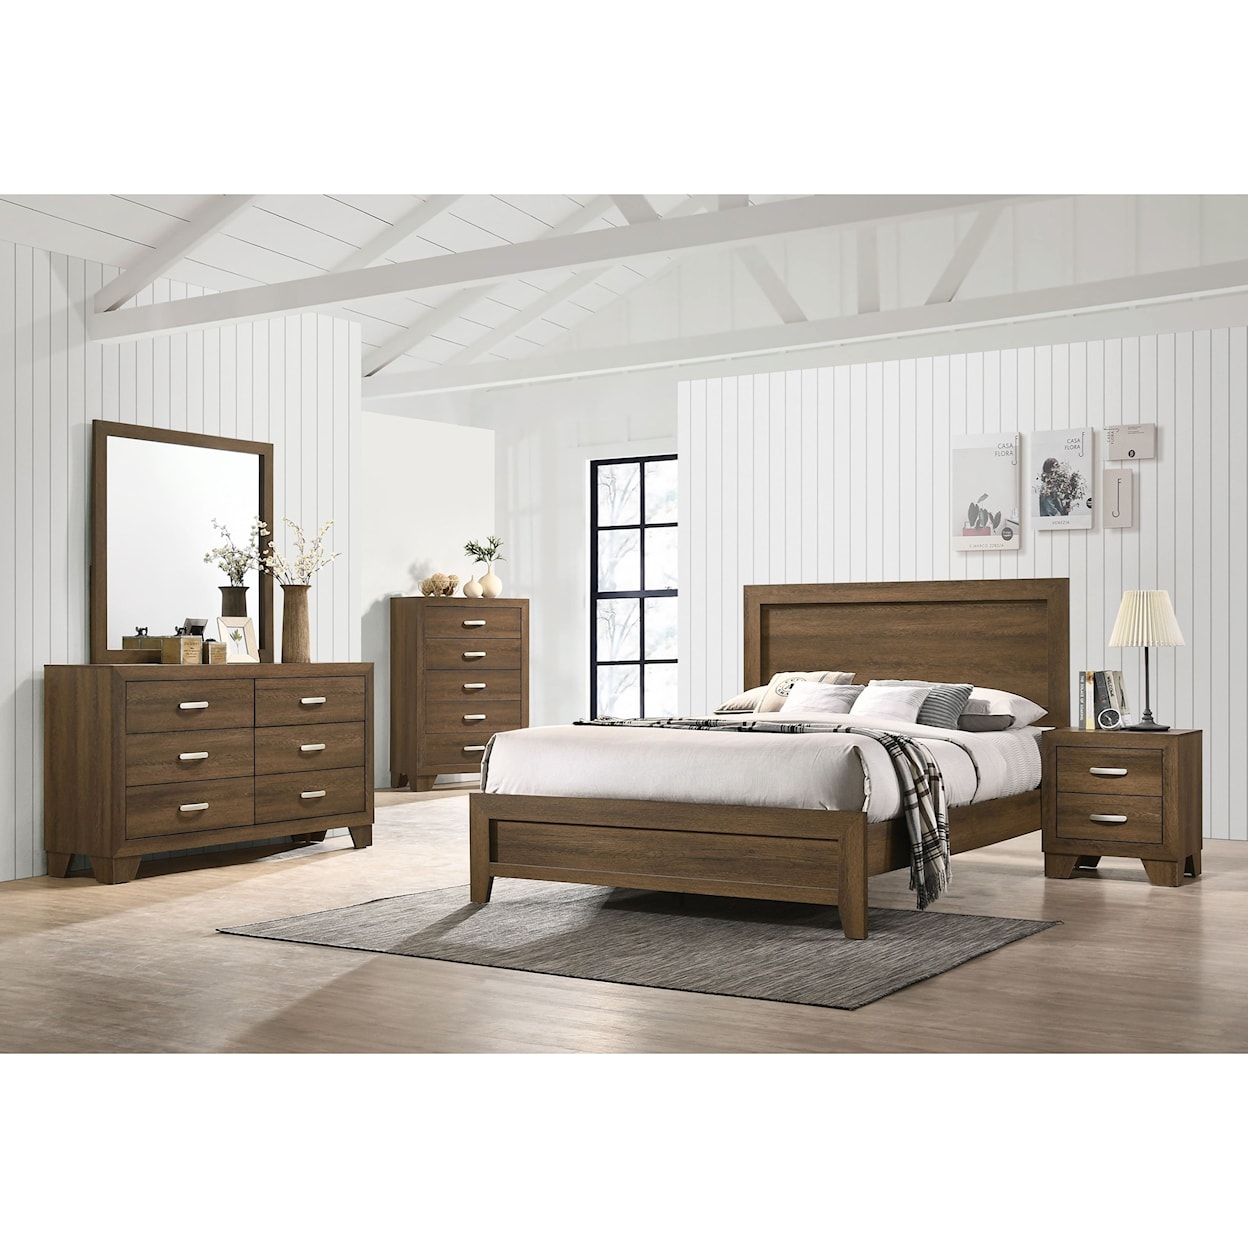 Acme Furniture Miquell 7pc Queen Bedroom Group